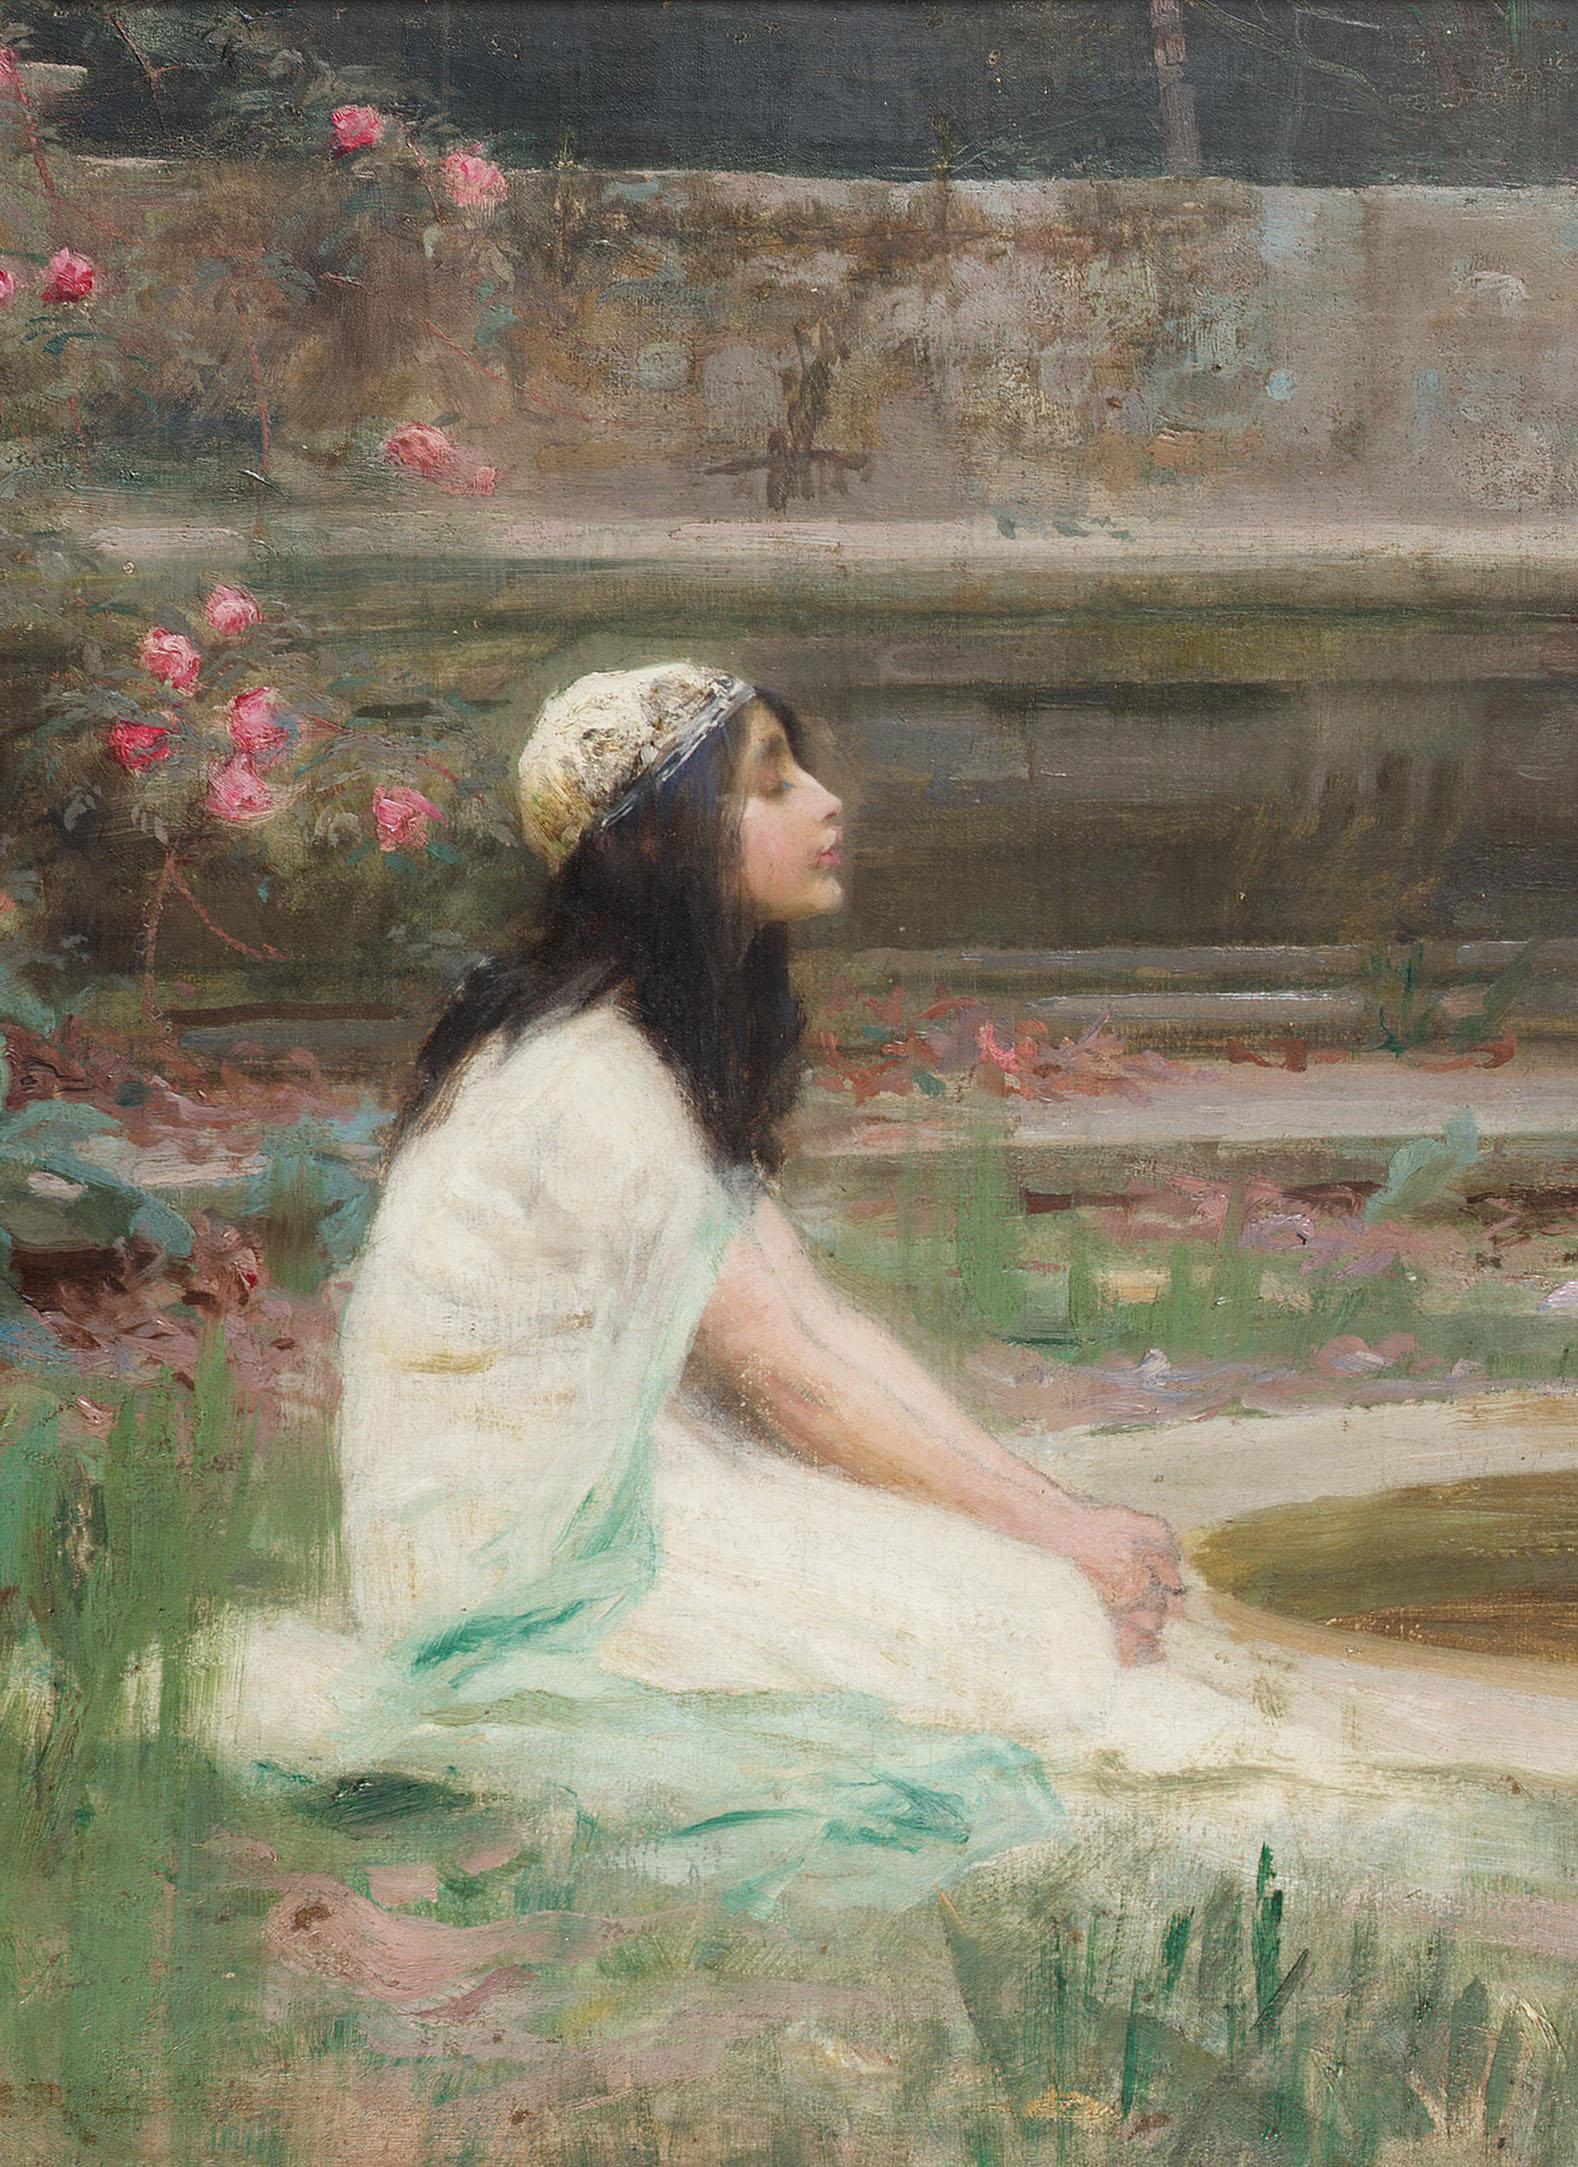 Herbert James Draper :: A Young Girl by a Pool, oil on canvas, signed 'H.J.DRAPER' (lower left), probably 1892-93. | src Bonhams | DETAIL